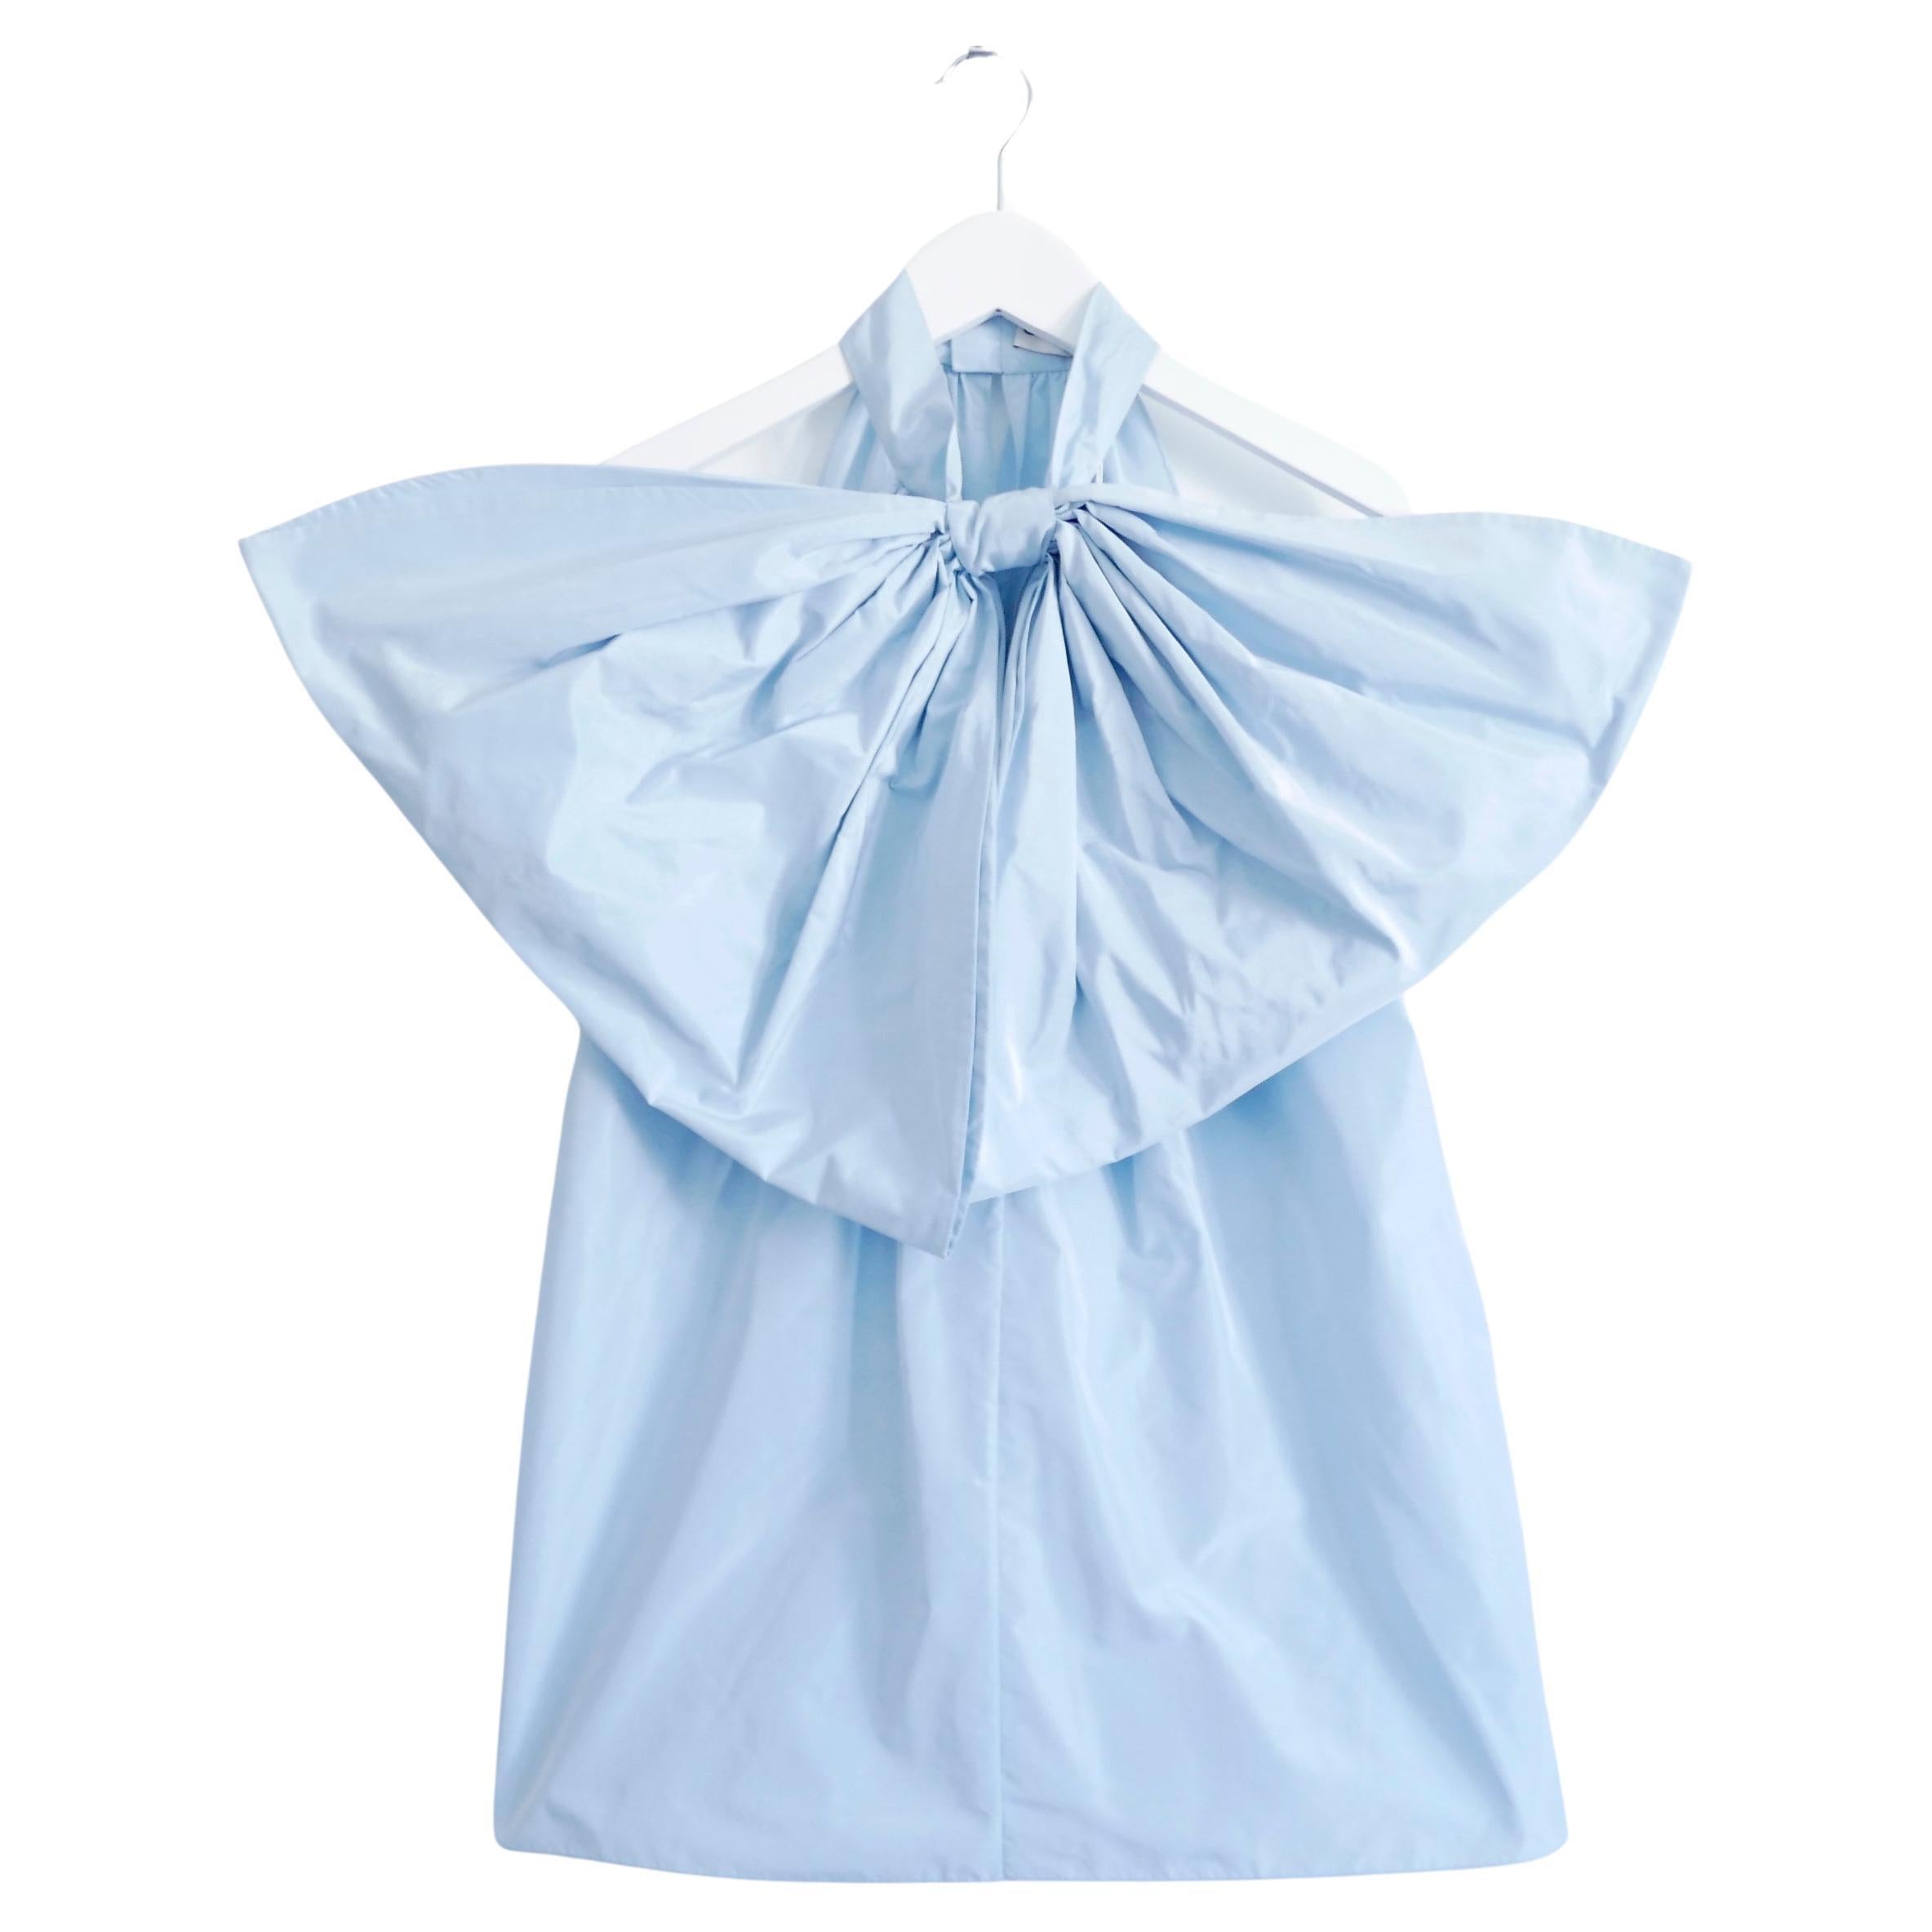 Givenchy pale blue exaggerated bow blouse